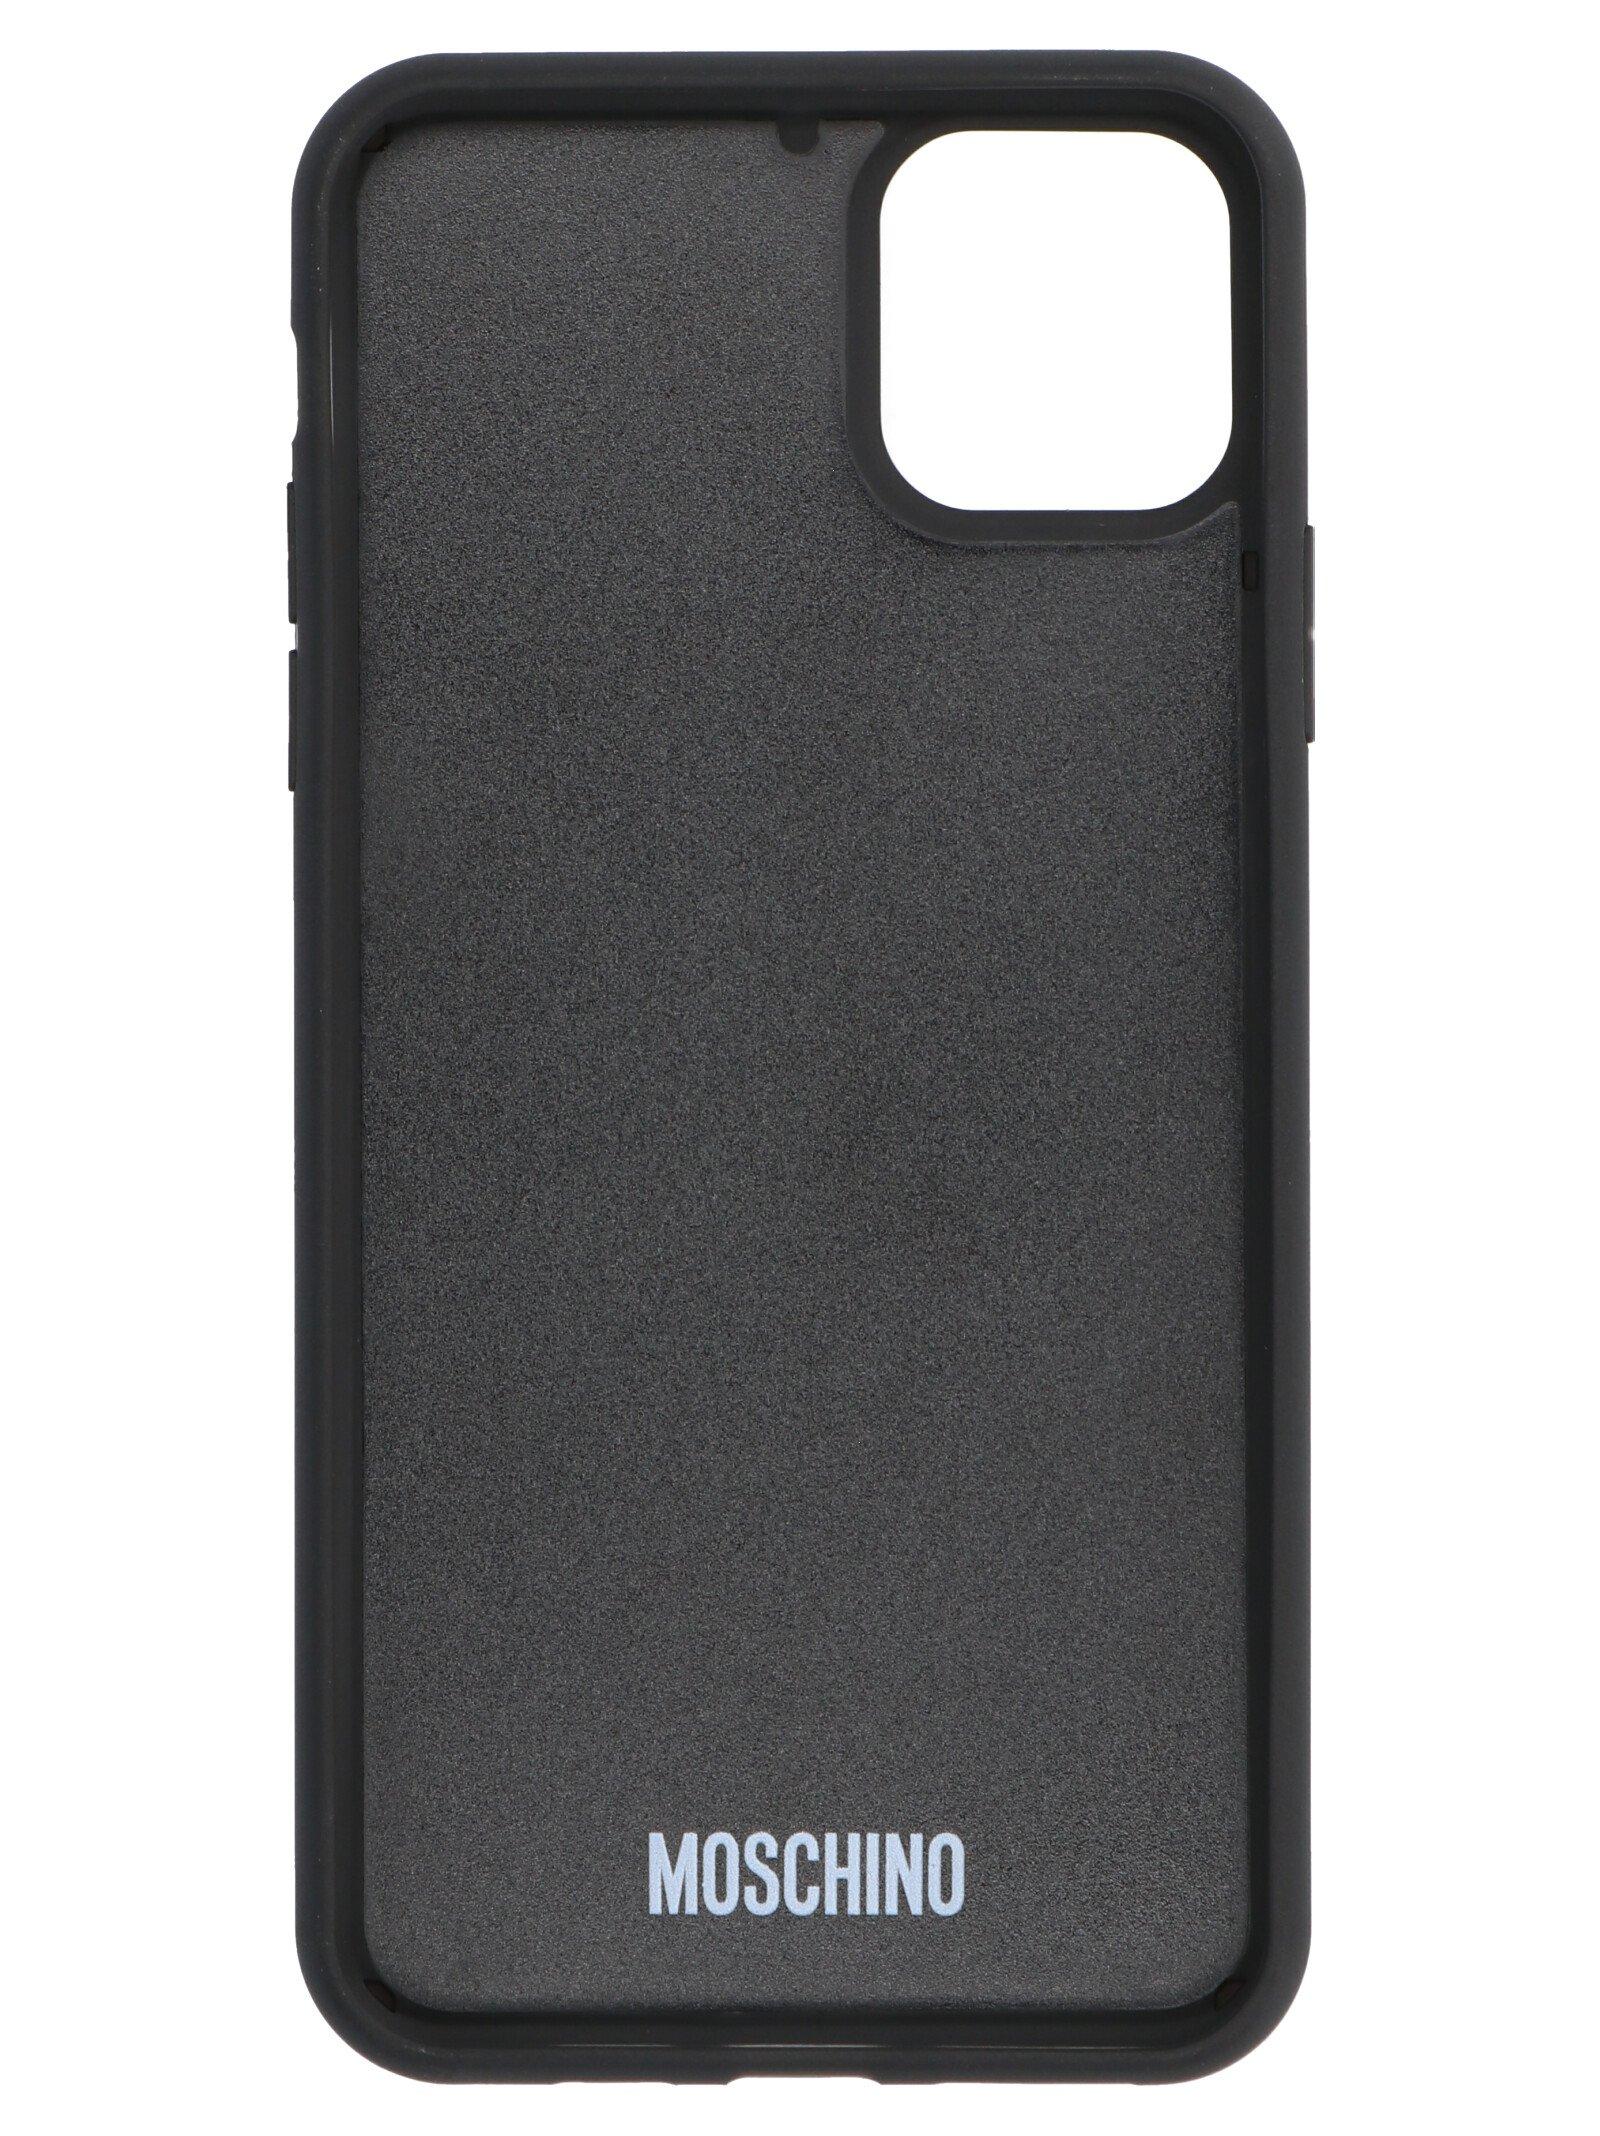 Moschino Teddy Iphone 11 Pro Max Case In Black Lyst